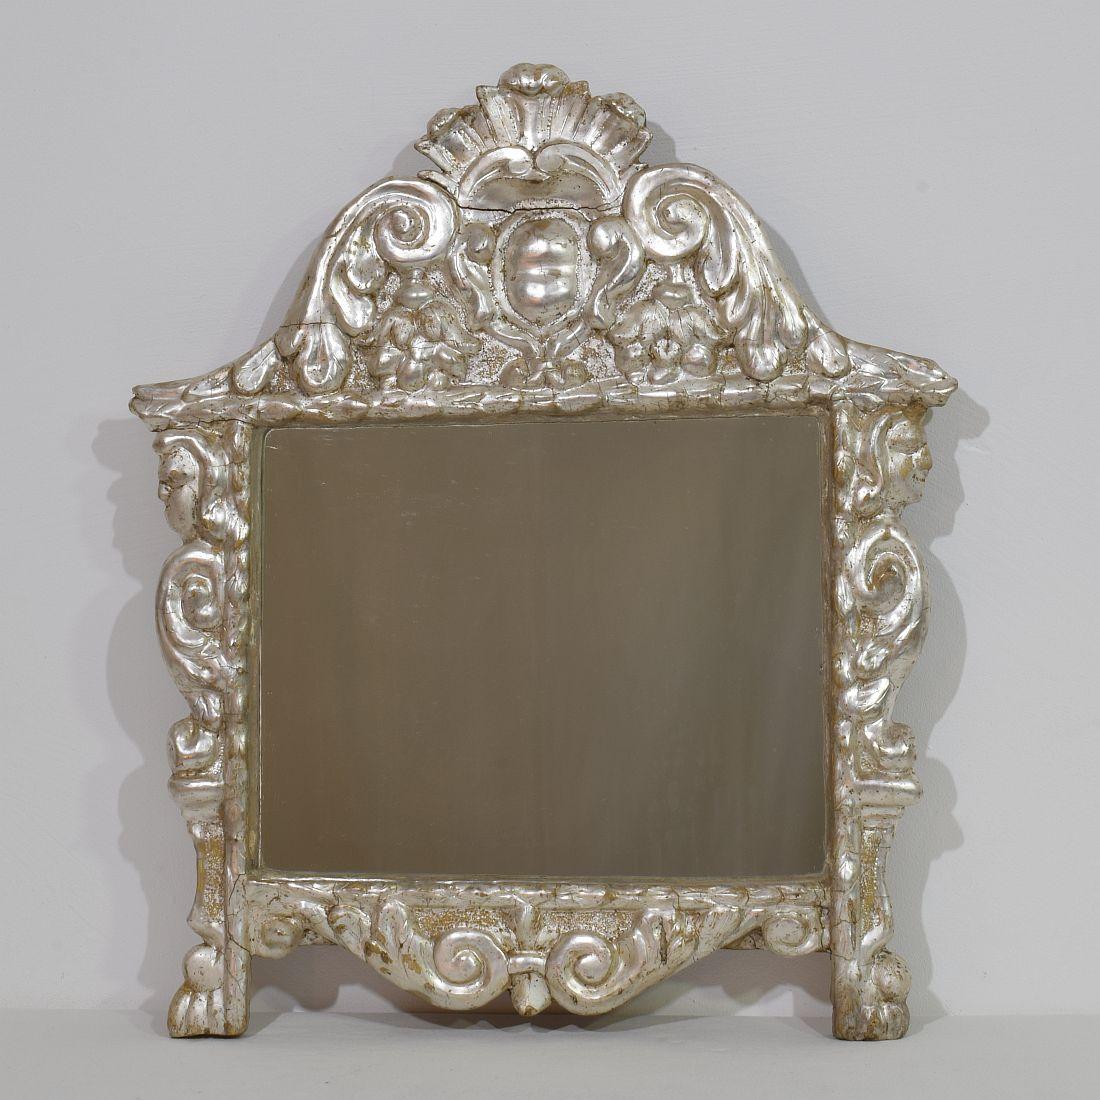 Amazing 17th/ 18th century hand carved silverleaf mirror. On the sides of the mirror you can see two angel heads on baroque curls and claw feet. 
Italy, circa 1650-1750, weathered, small losses and old repairs. Old mirror glass but to my opinion